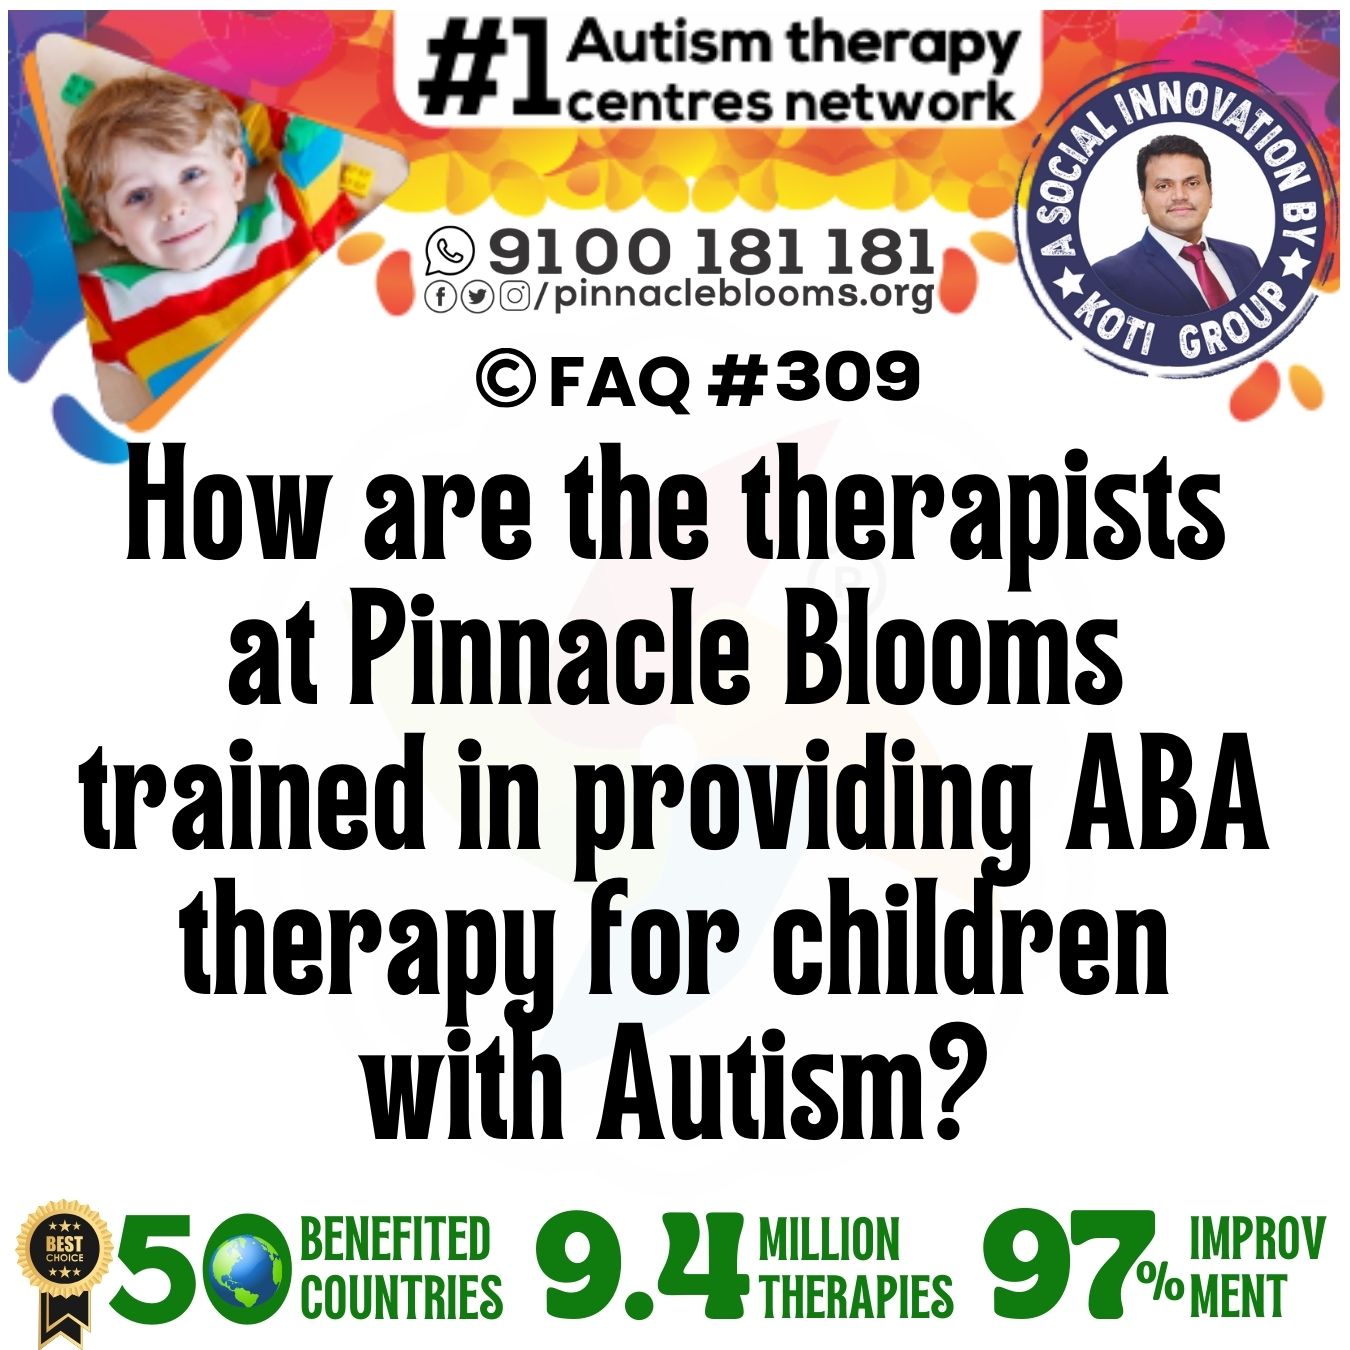 How are the therapists at Pinnacle Blooms trained in providing ABA therapy for children with Autism?